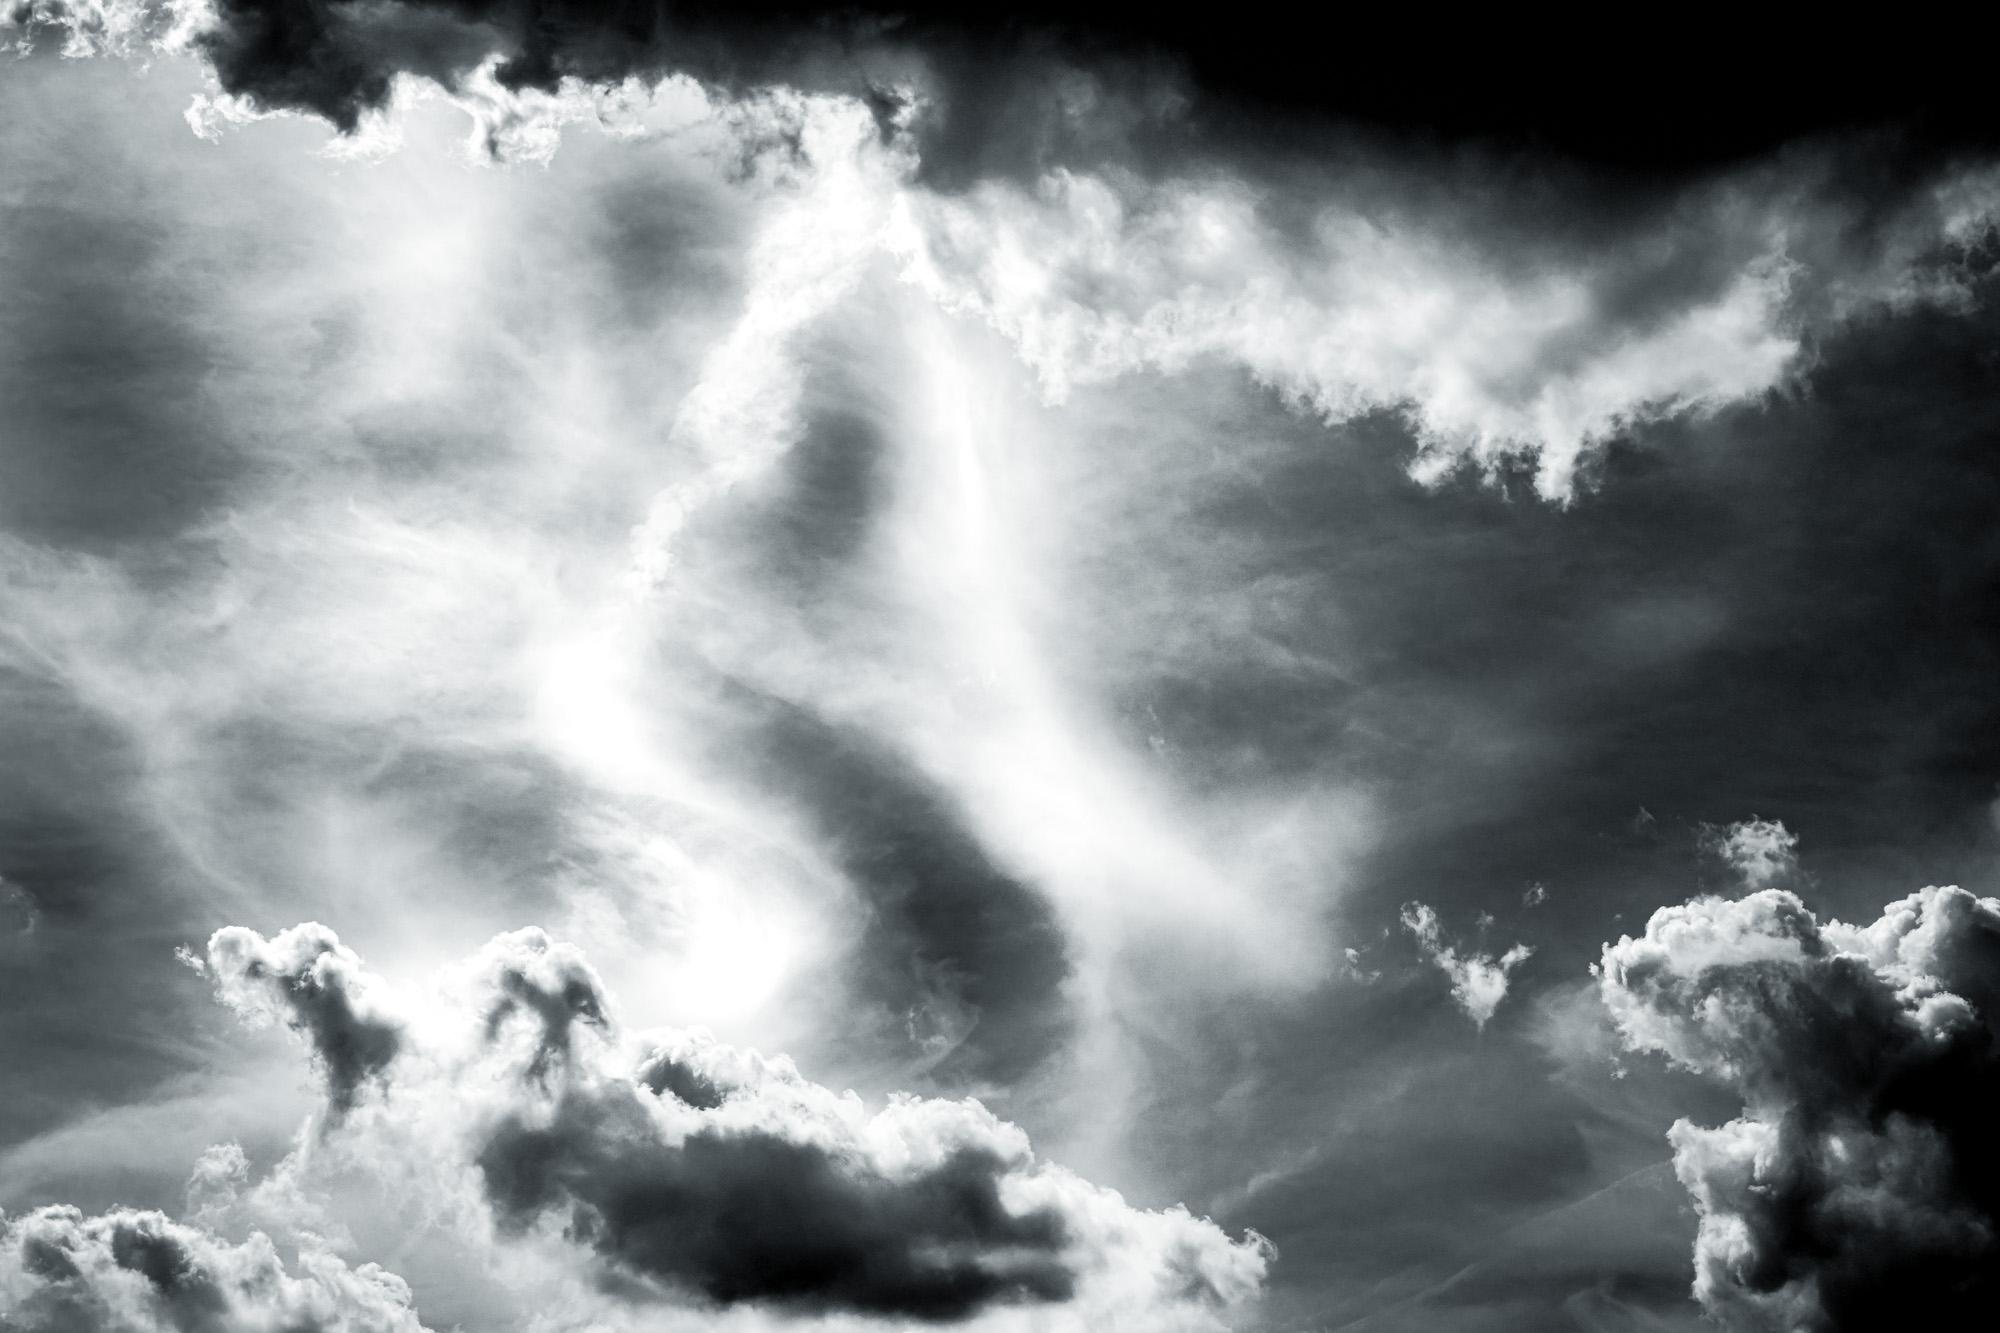 Howard Lewis Landscape Photograph - Limited Edition Black and White Photograph - " Howling Sky "